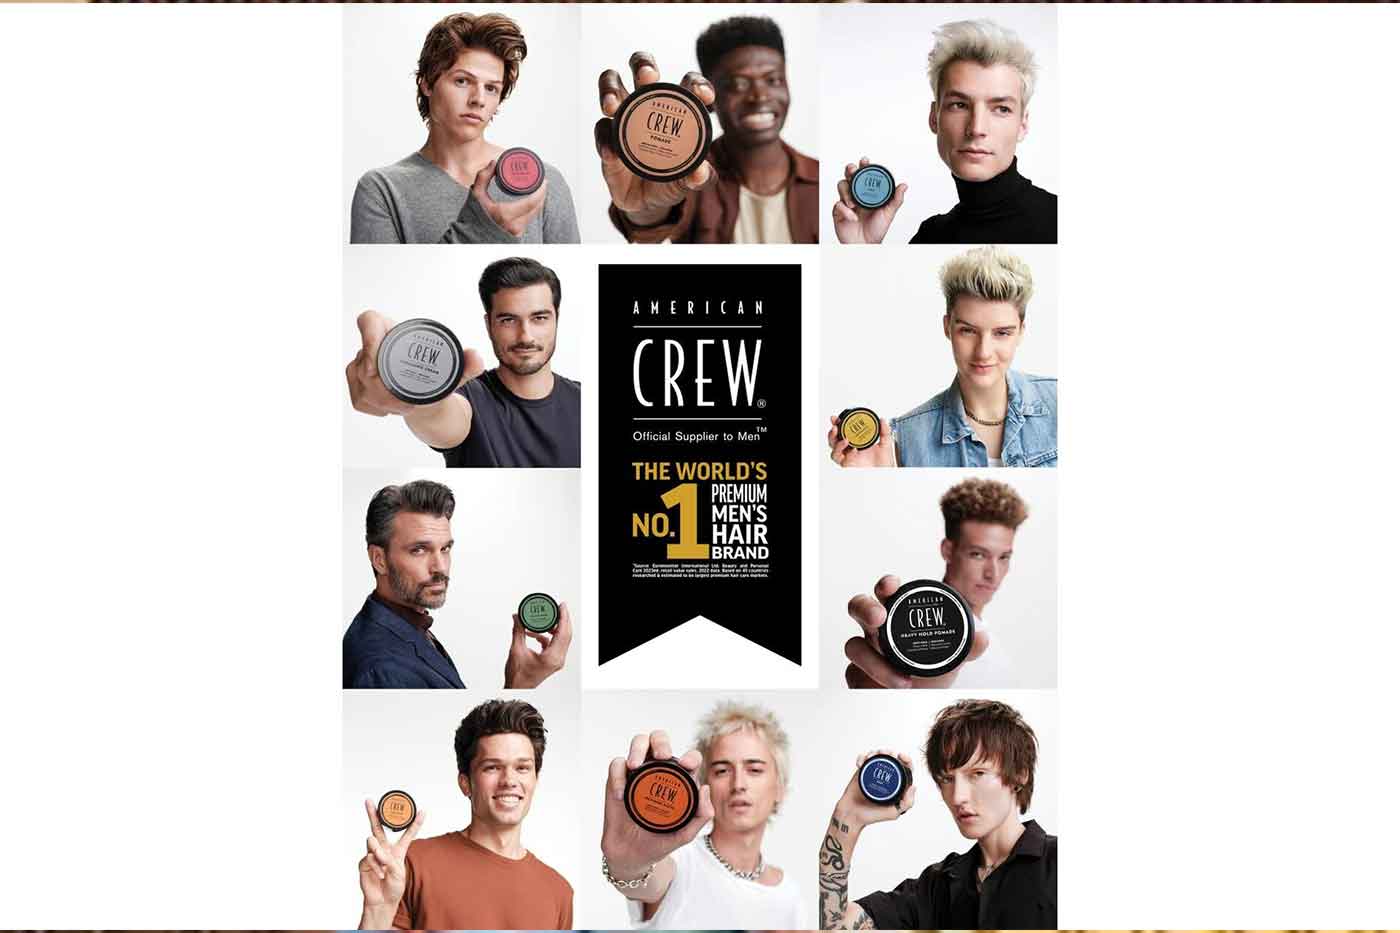 American Crew becomes the top men’s grooming brand in the world